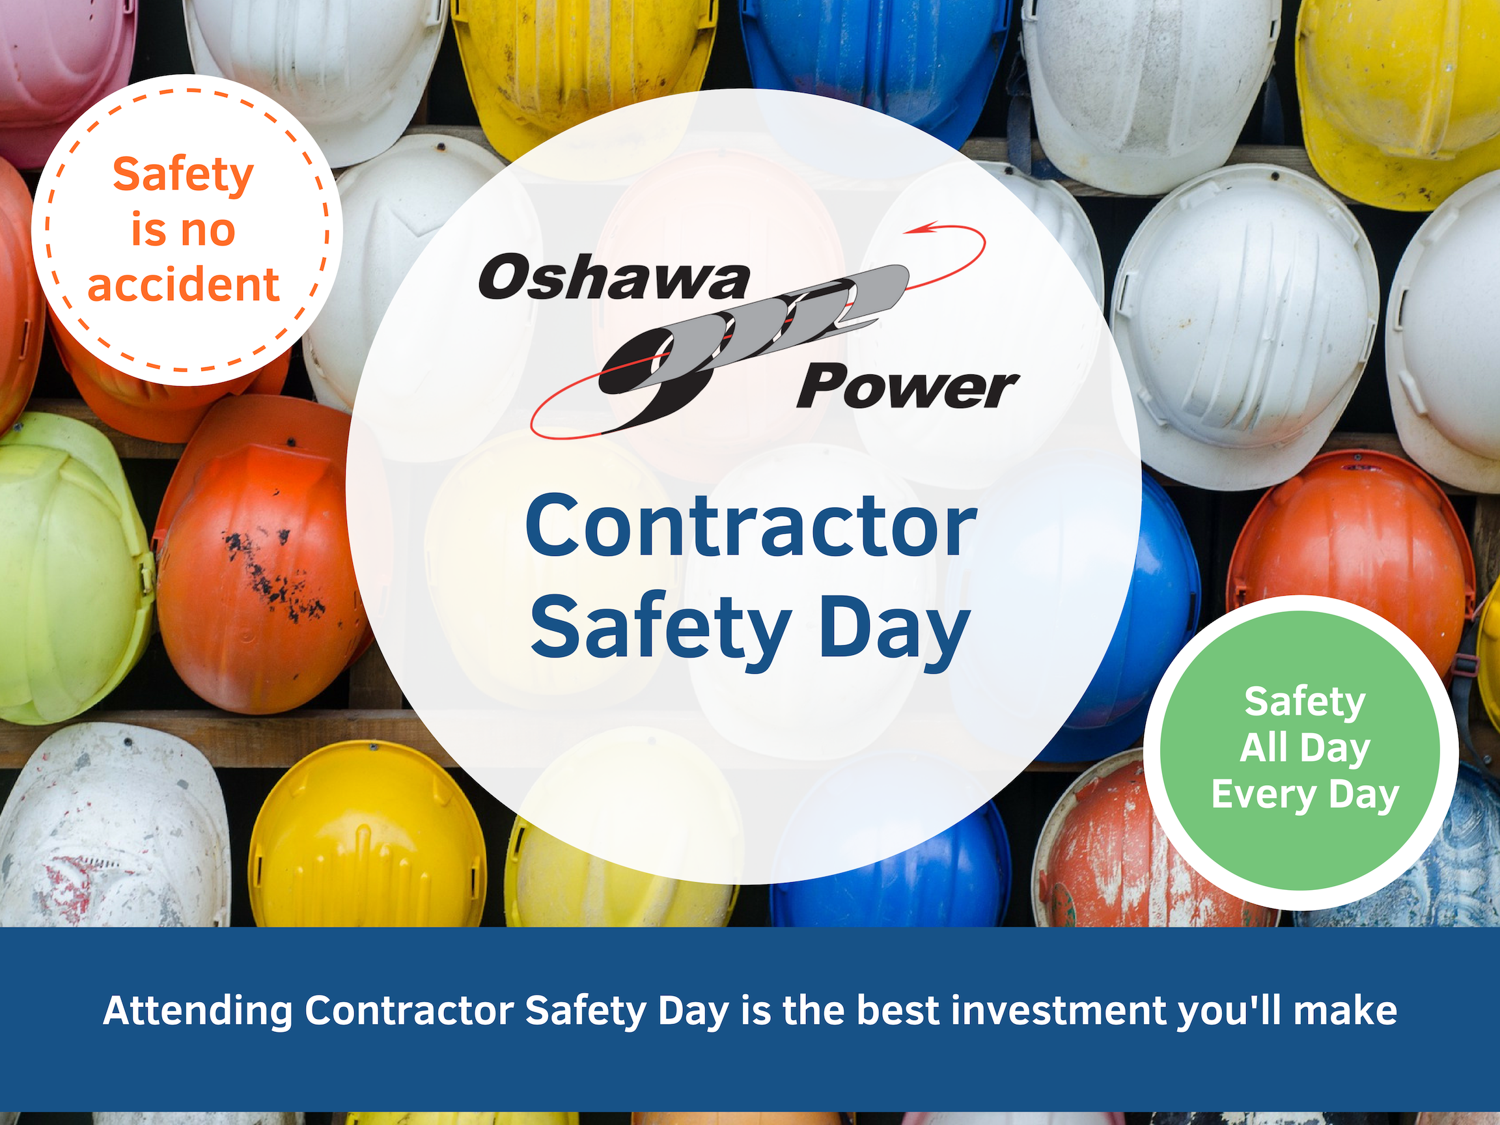 Oshawa Power’s First Annual Contractor Safety Day!